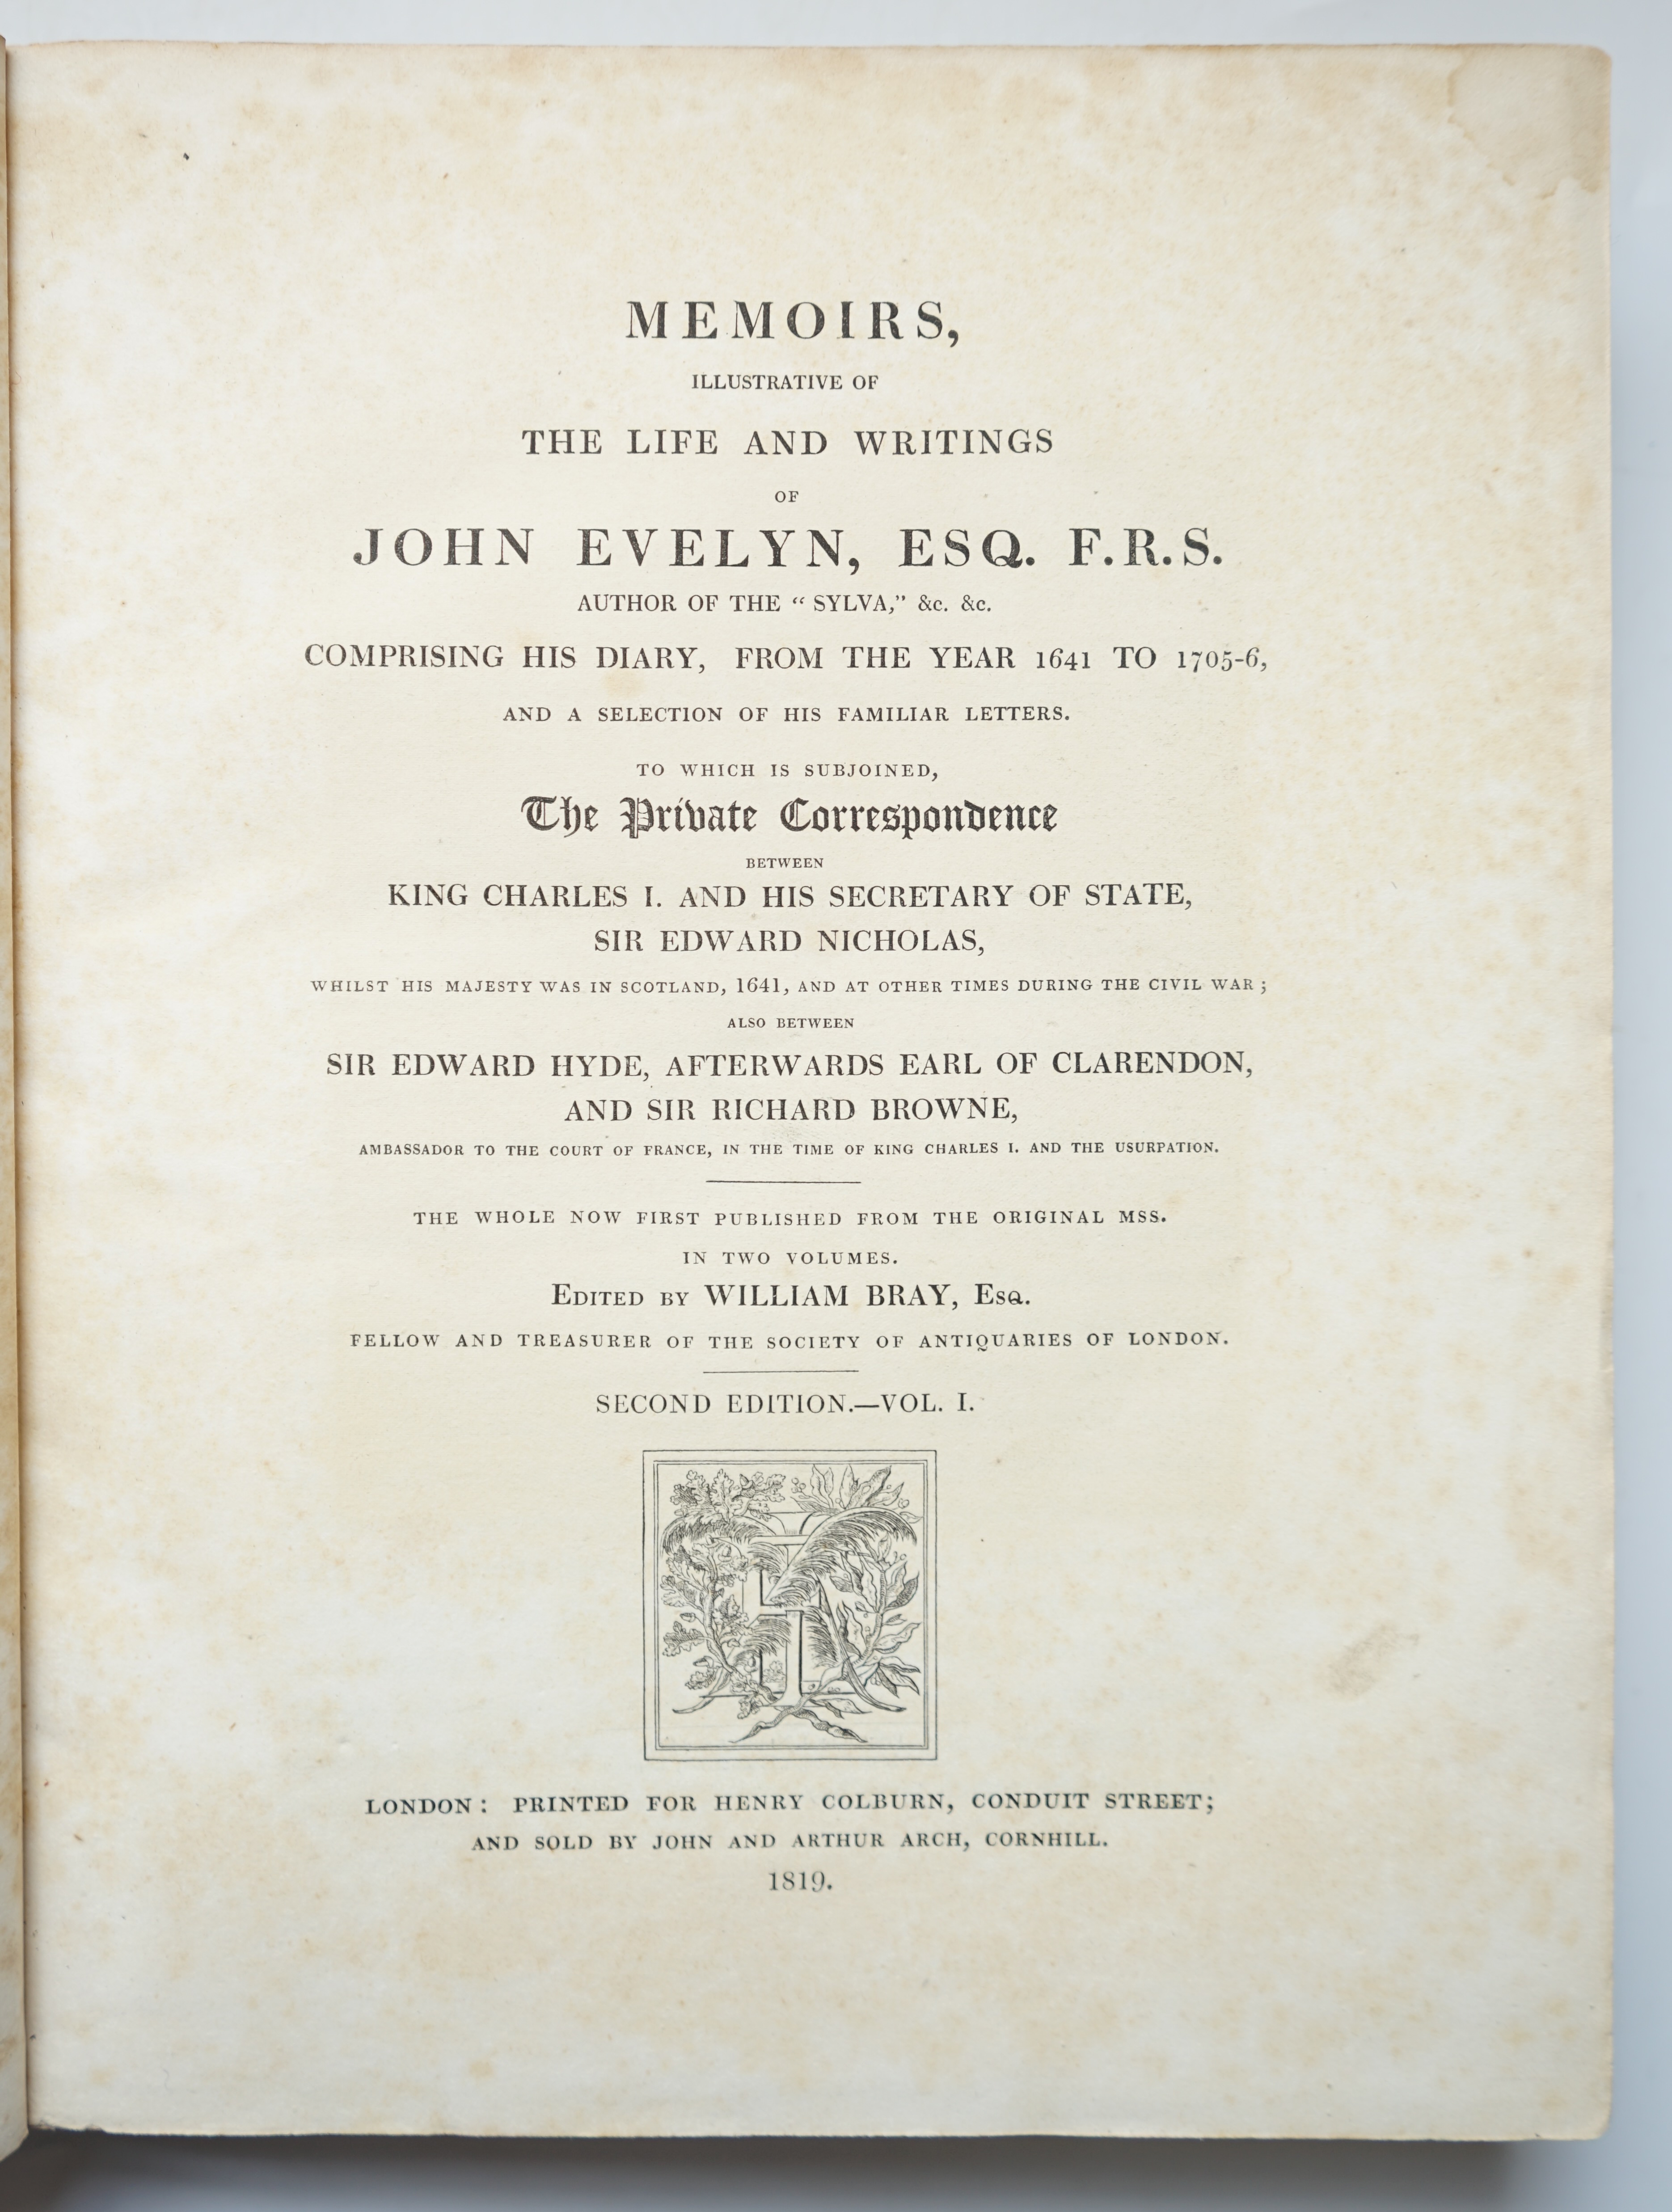 Evelyn , John - Memoirs Illustrative of the Life and Writings of John Evelyn, Esq. F.R.S., edited by William Bray, 2 Vols, 2nd edition, large paper copy, rebound quarter calf with renewed endpapers, with 12 engraved plat